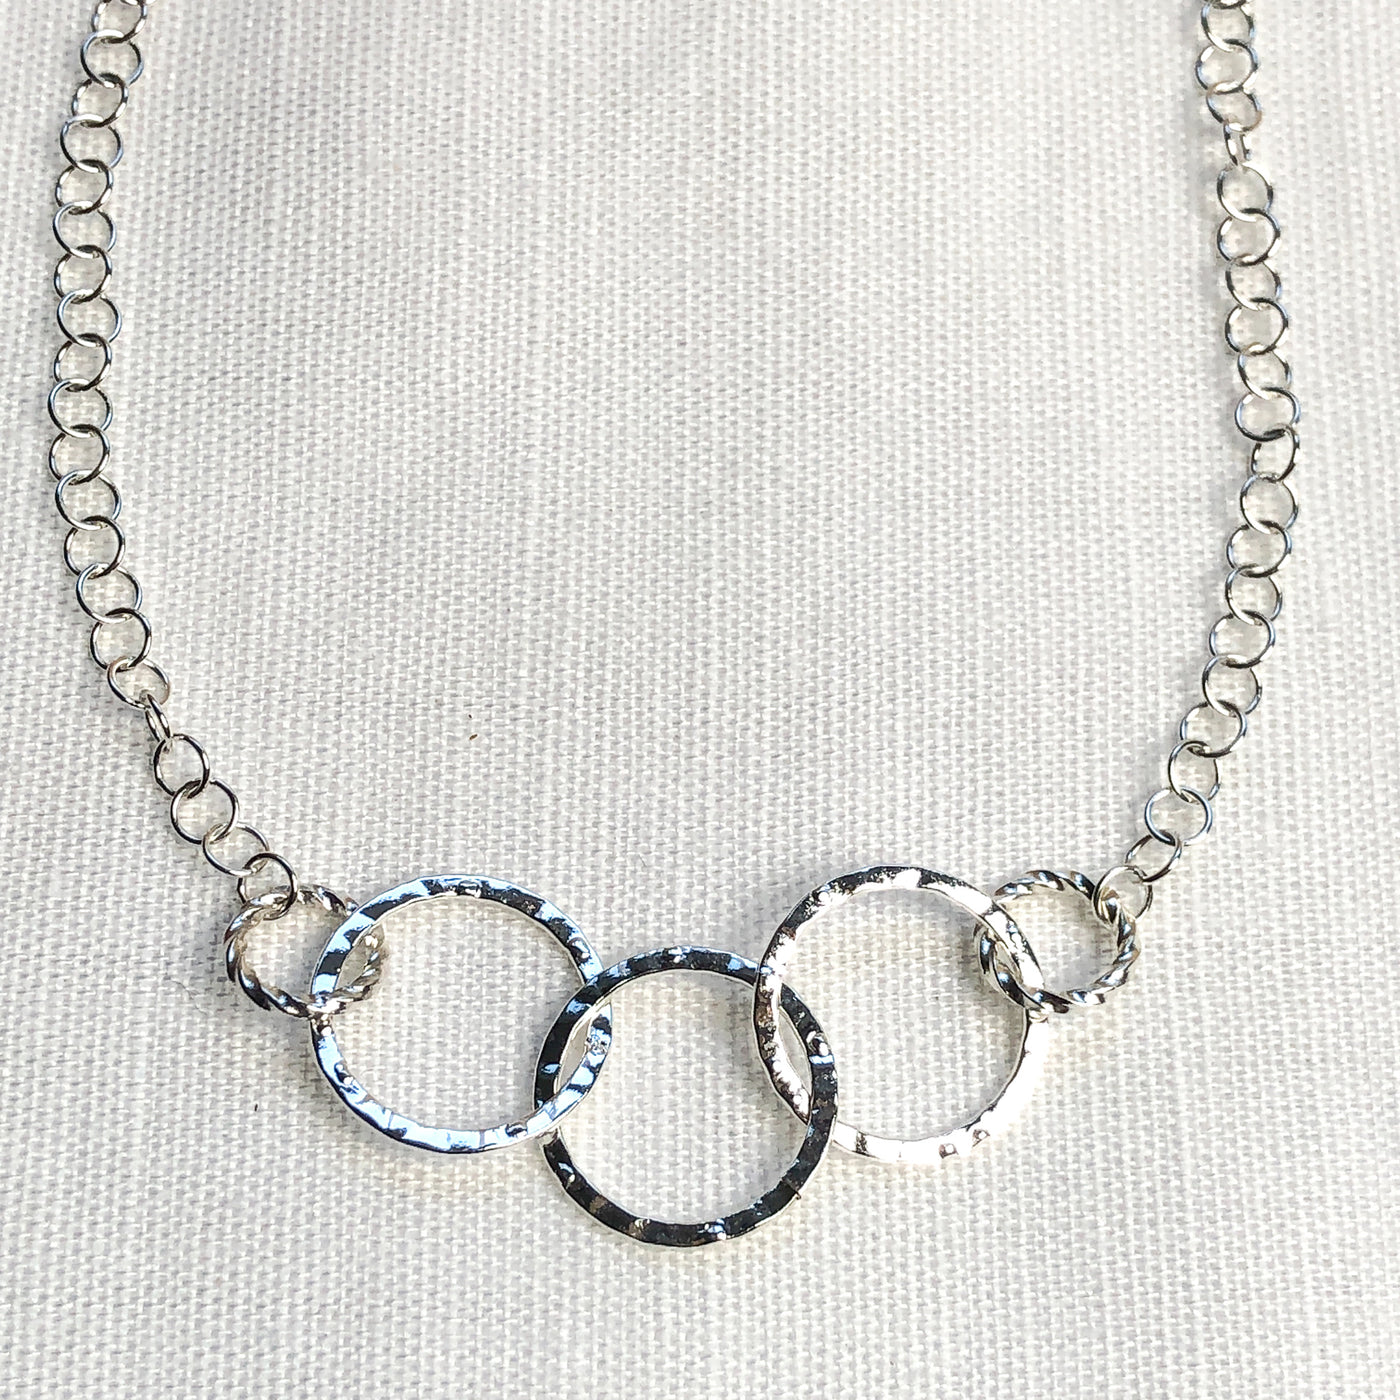 Lightweight & Graceful Silver Hammered Circle Necklace; 15 inches; Adjustable to fit lovingly on the neck. Detail View. Part of the Novaura Sparkle Set.